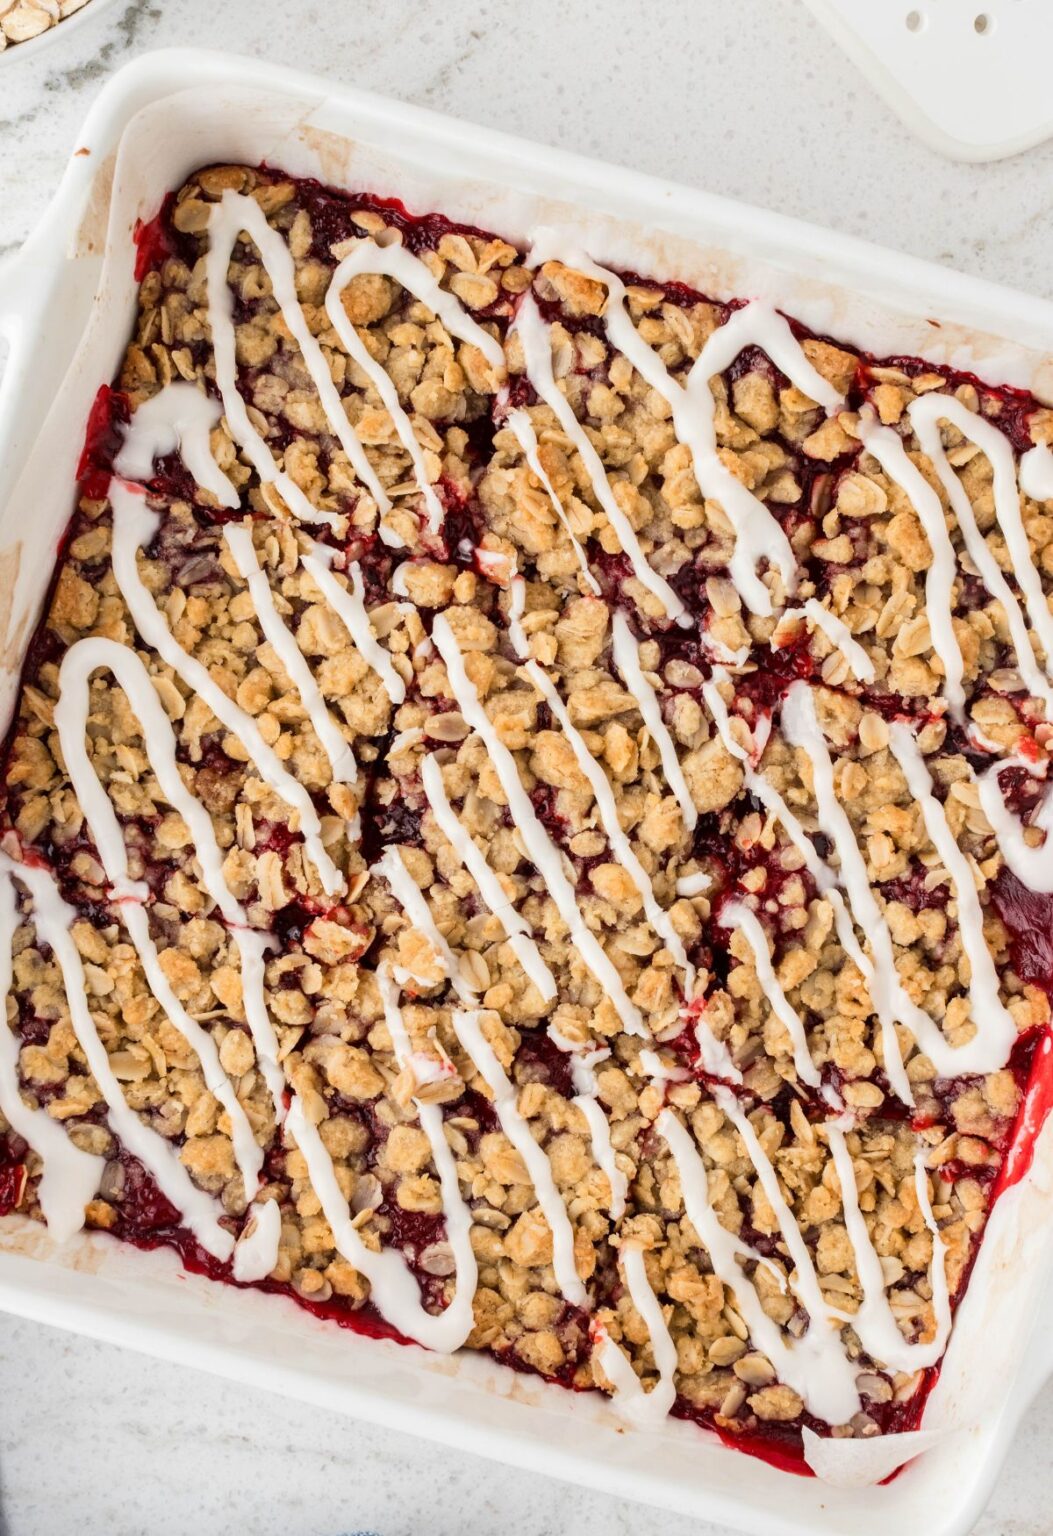 Strawberry Oatmeal Crumble Bars - Together as Family